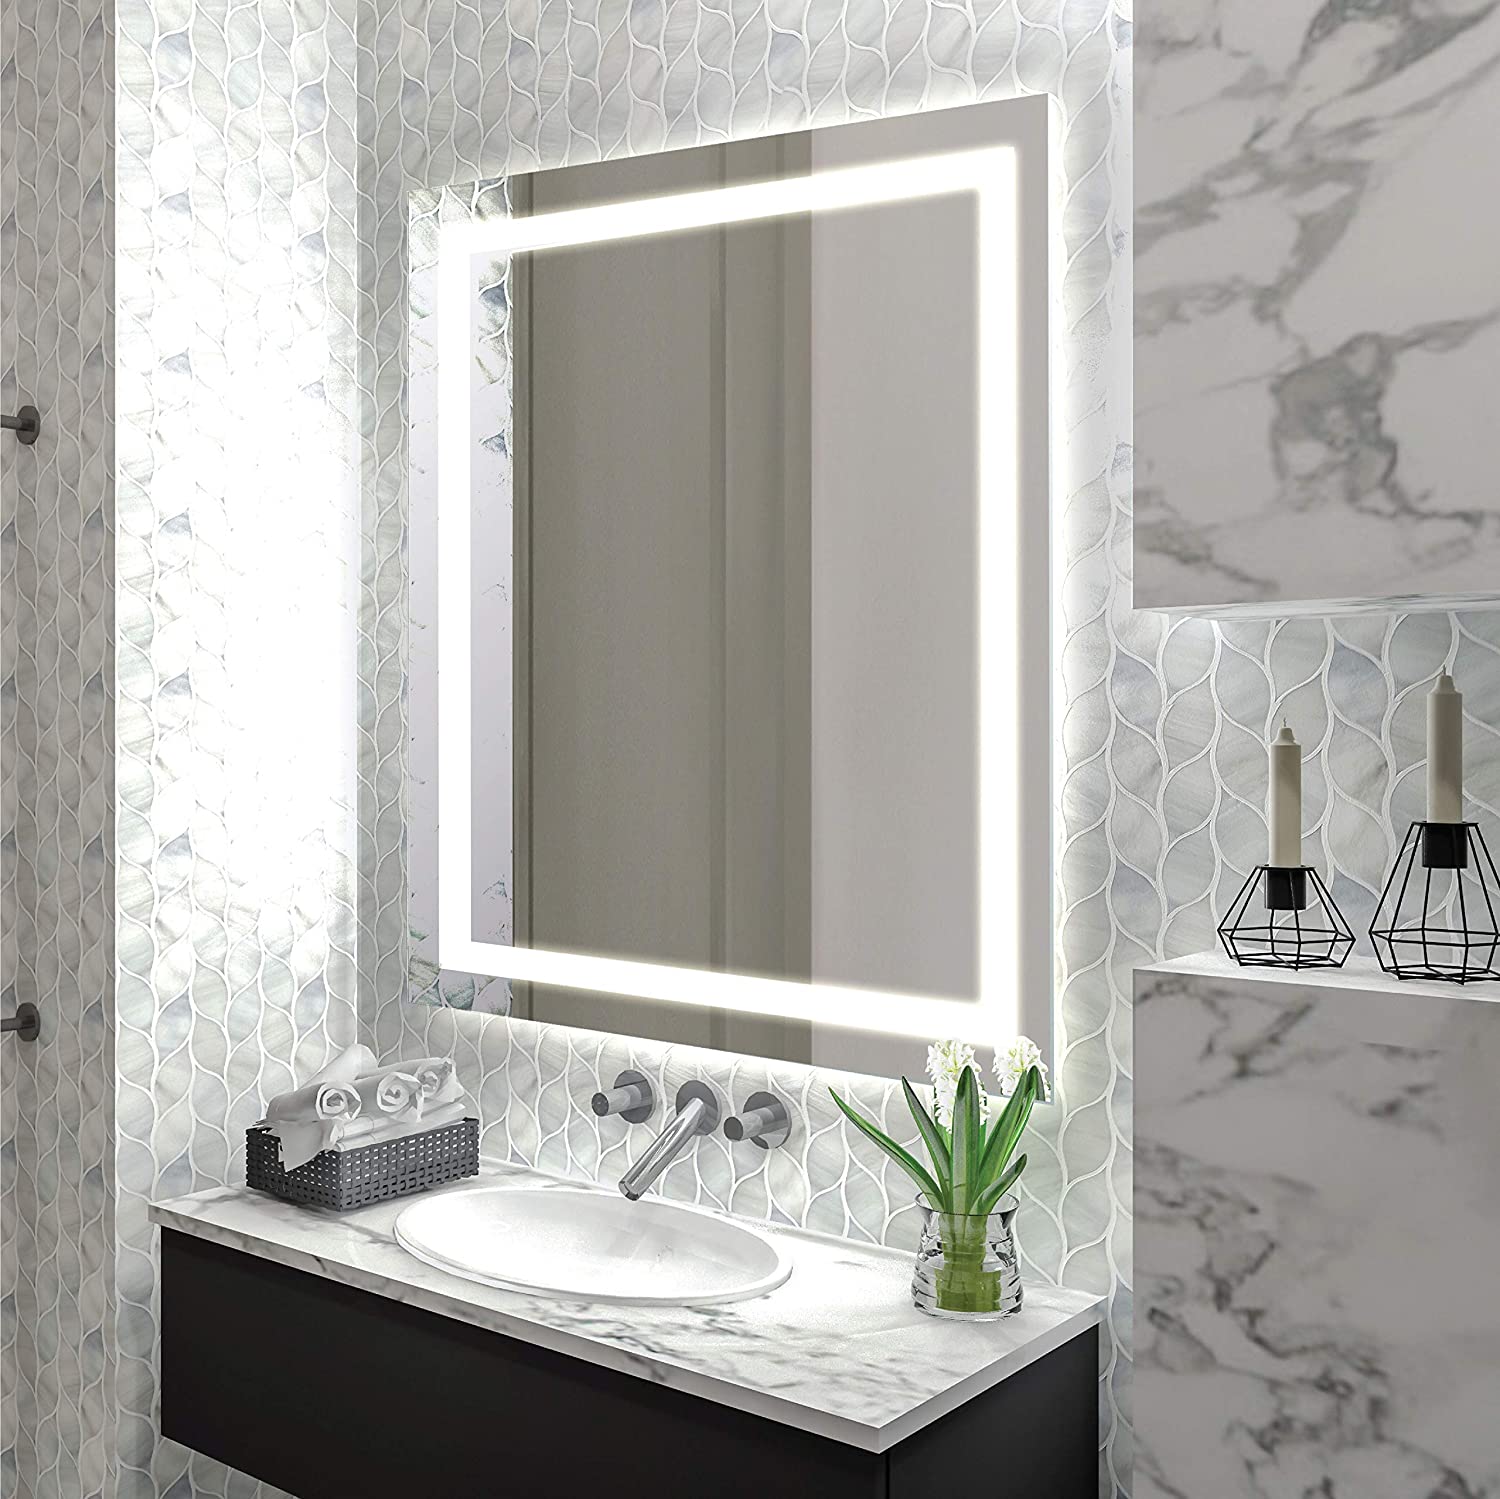 Top 10 Best Led Bathroom Mirrors Reviews Brand Review